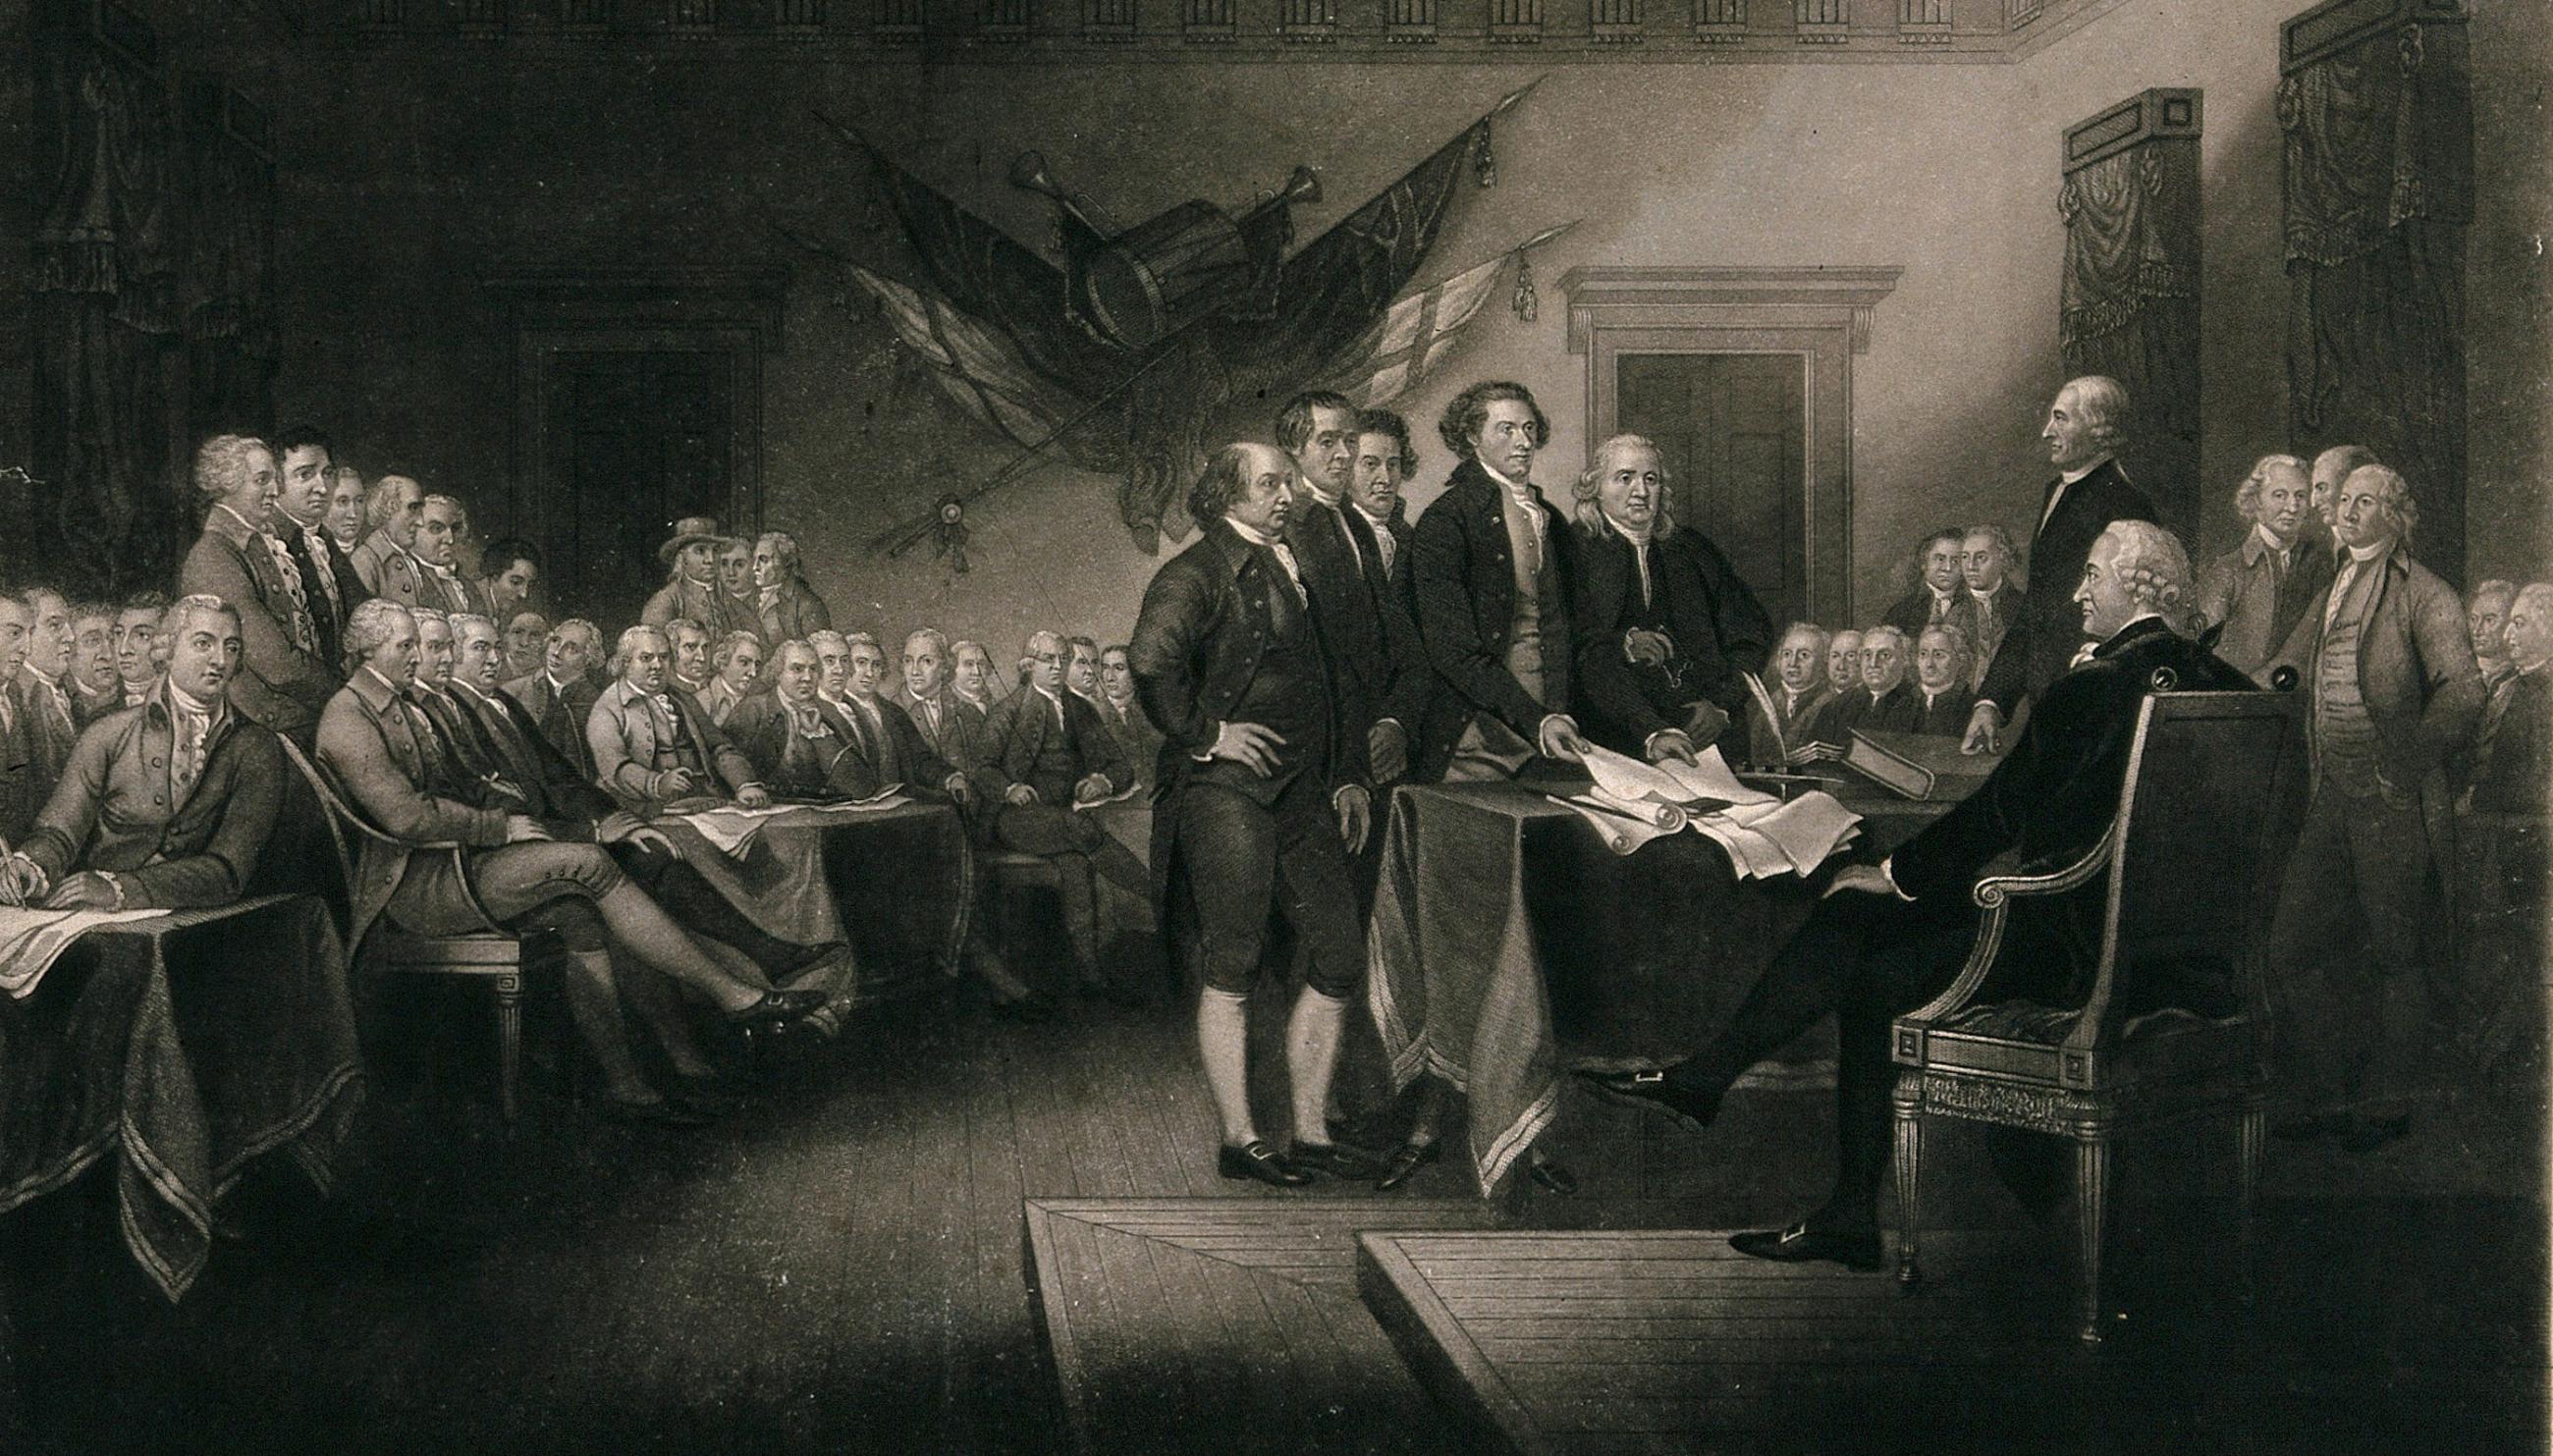 The image is taken from a famous depiction by after J. Trumbull and shows early colonial leaders gathered around the document in Philadelphia. 